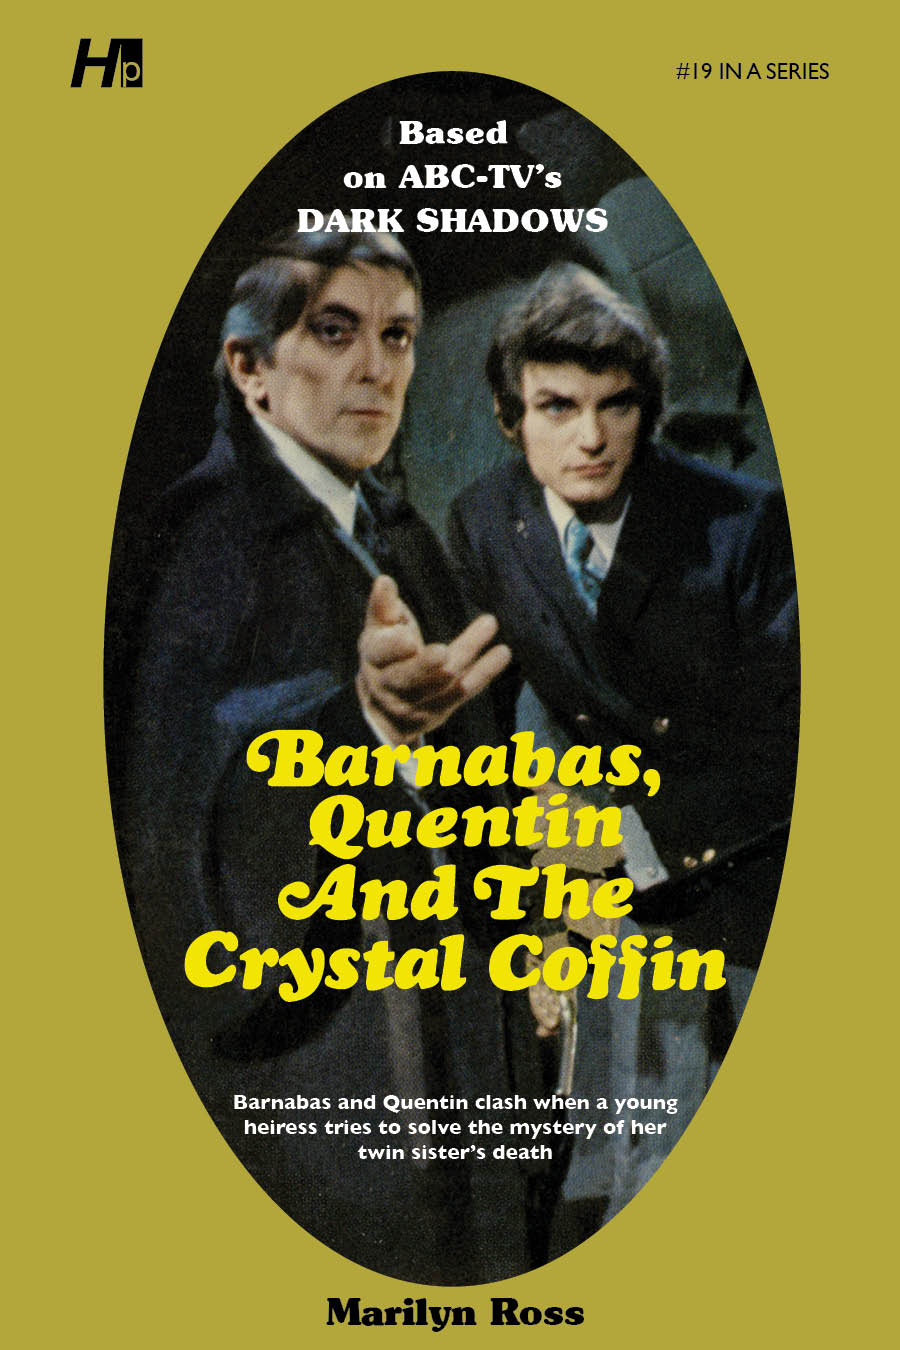 Dark Shadows #19: Barnabas, Quentin and the Crystal Coffin [Paperback]